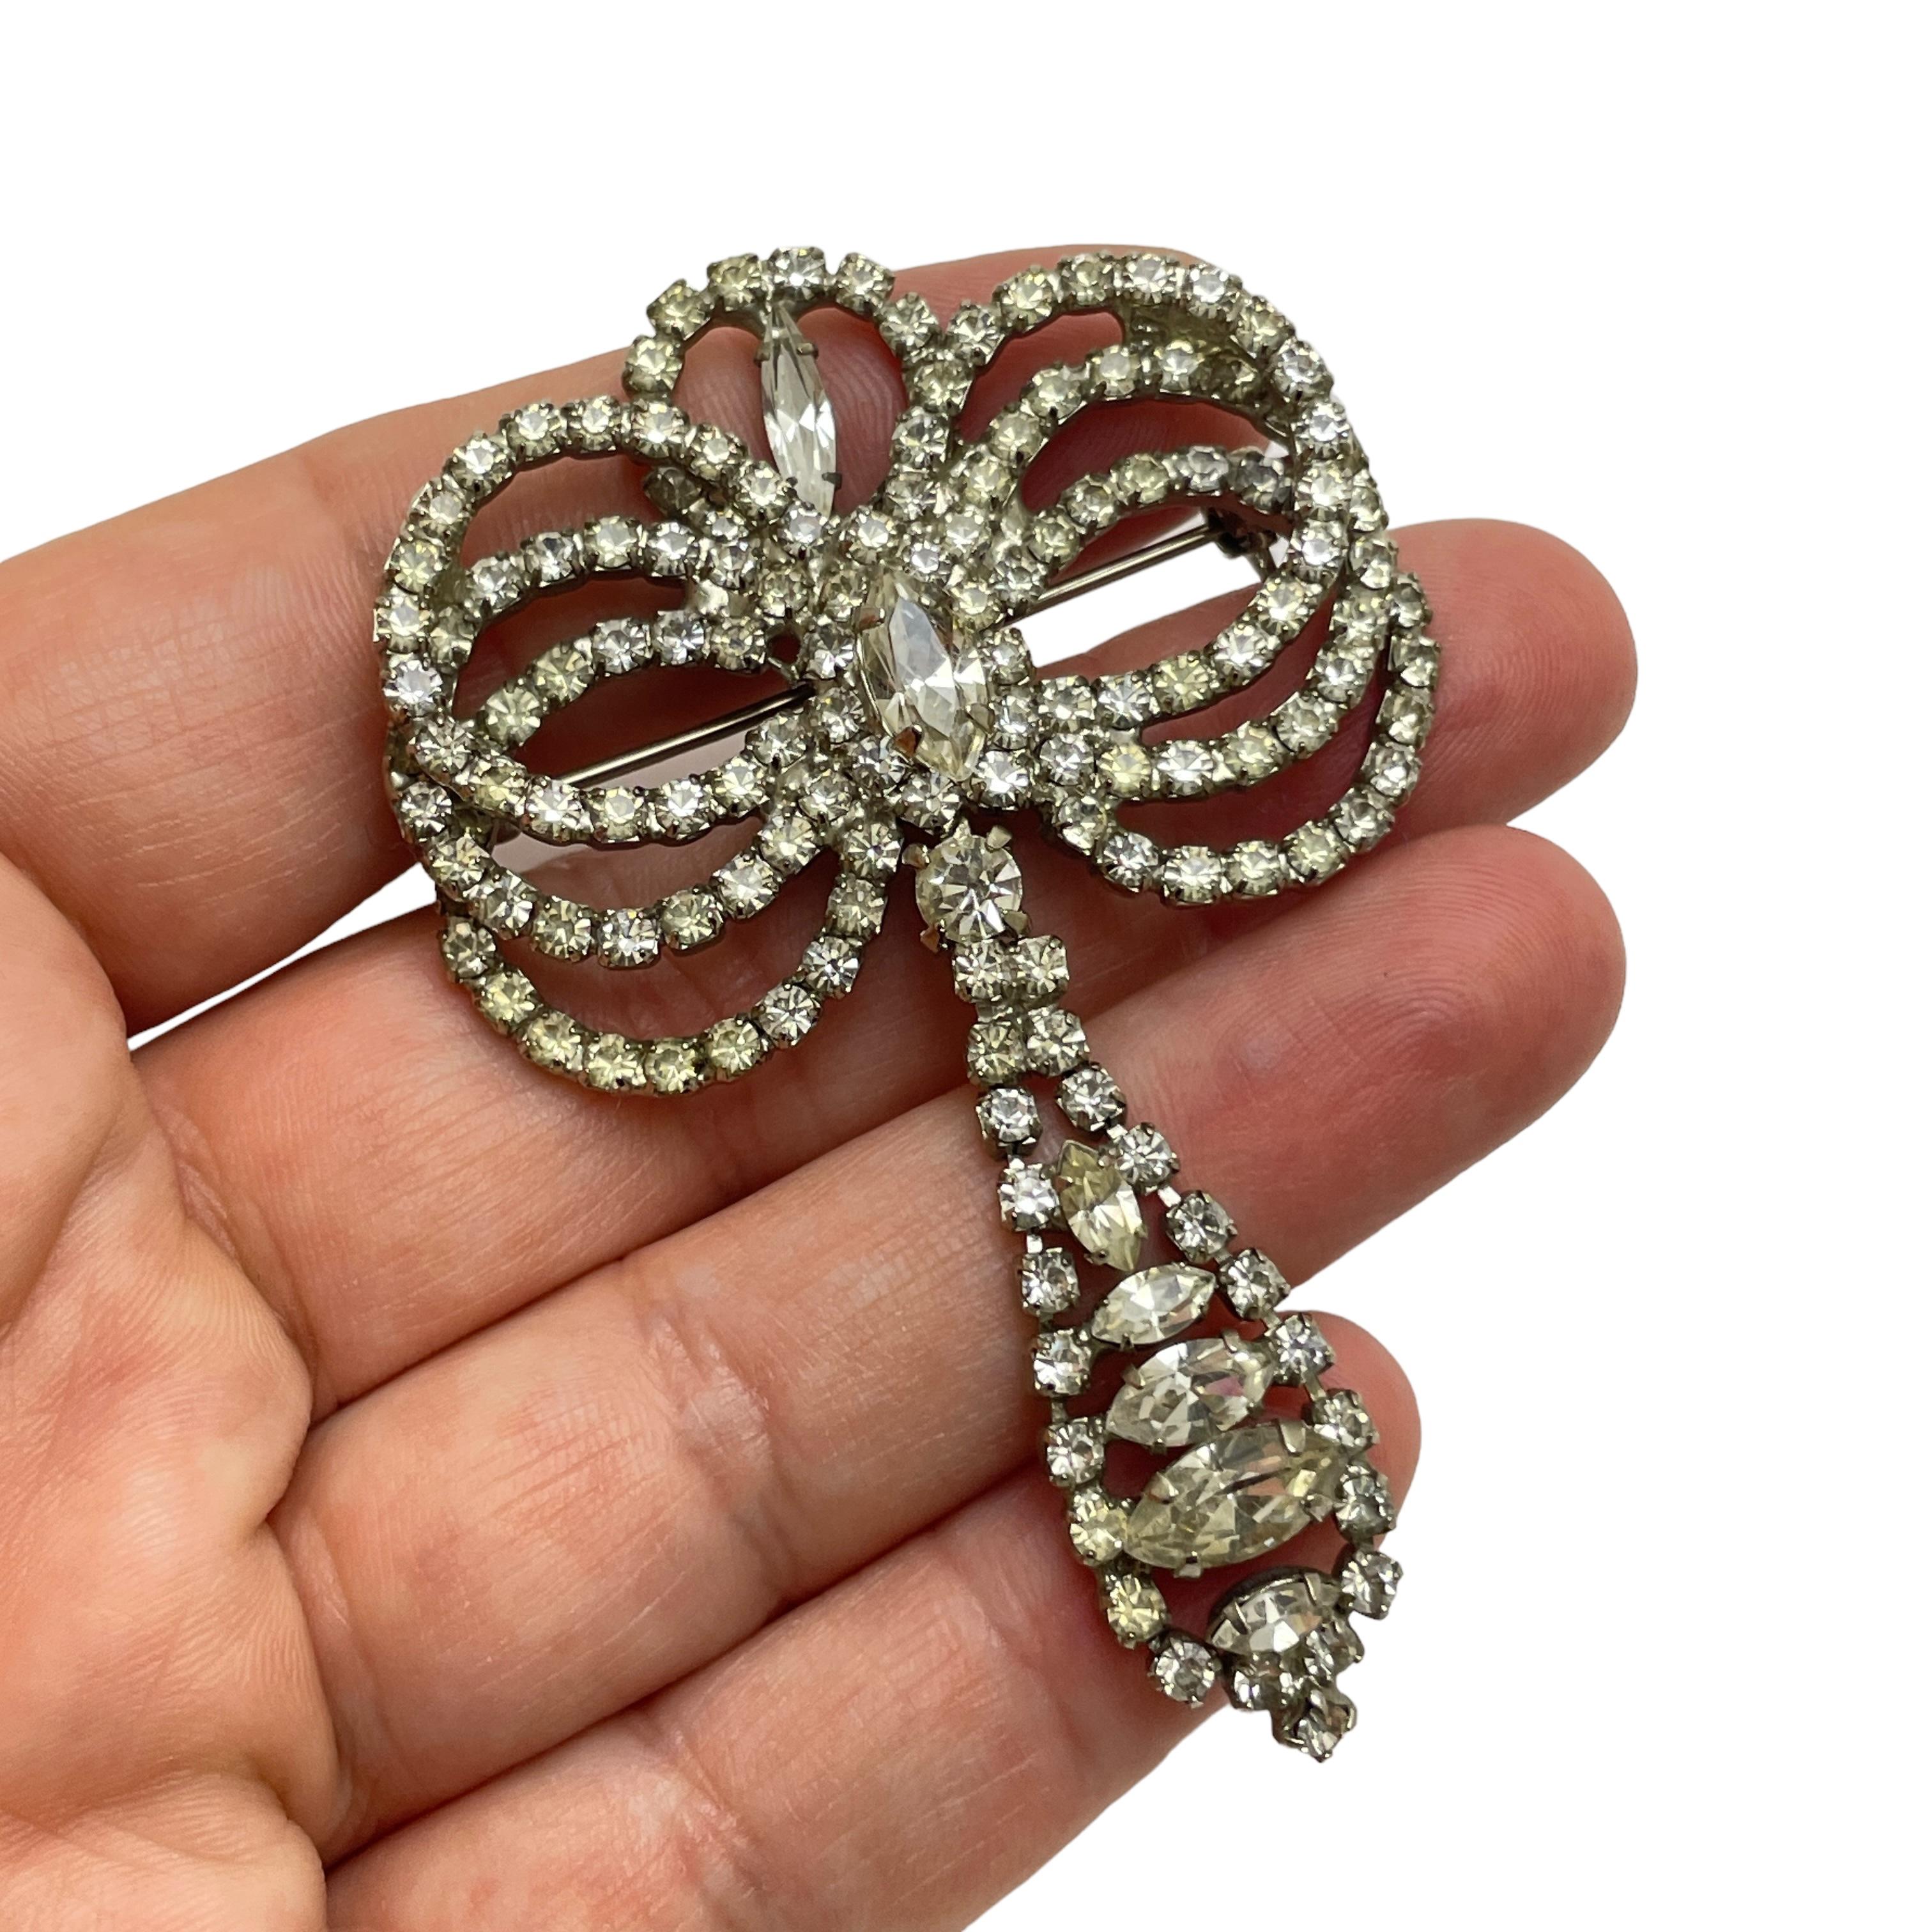 DETAILS

• unsigned

• silver tone with rhinestones

• vintage designer runway brooch

MEASUREMENTS

• 

CONDITION

• excellent vintage condition with minimal signs of wear

❤️❤️ VINTAGE DESIGNER JEWELRY ❤️❤️
❤️❤️ ALEXANDER'S BOUTIQUE ❤️❤️